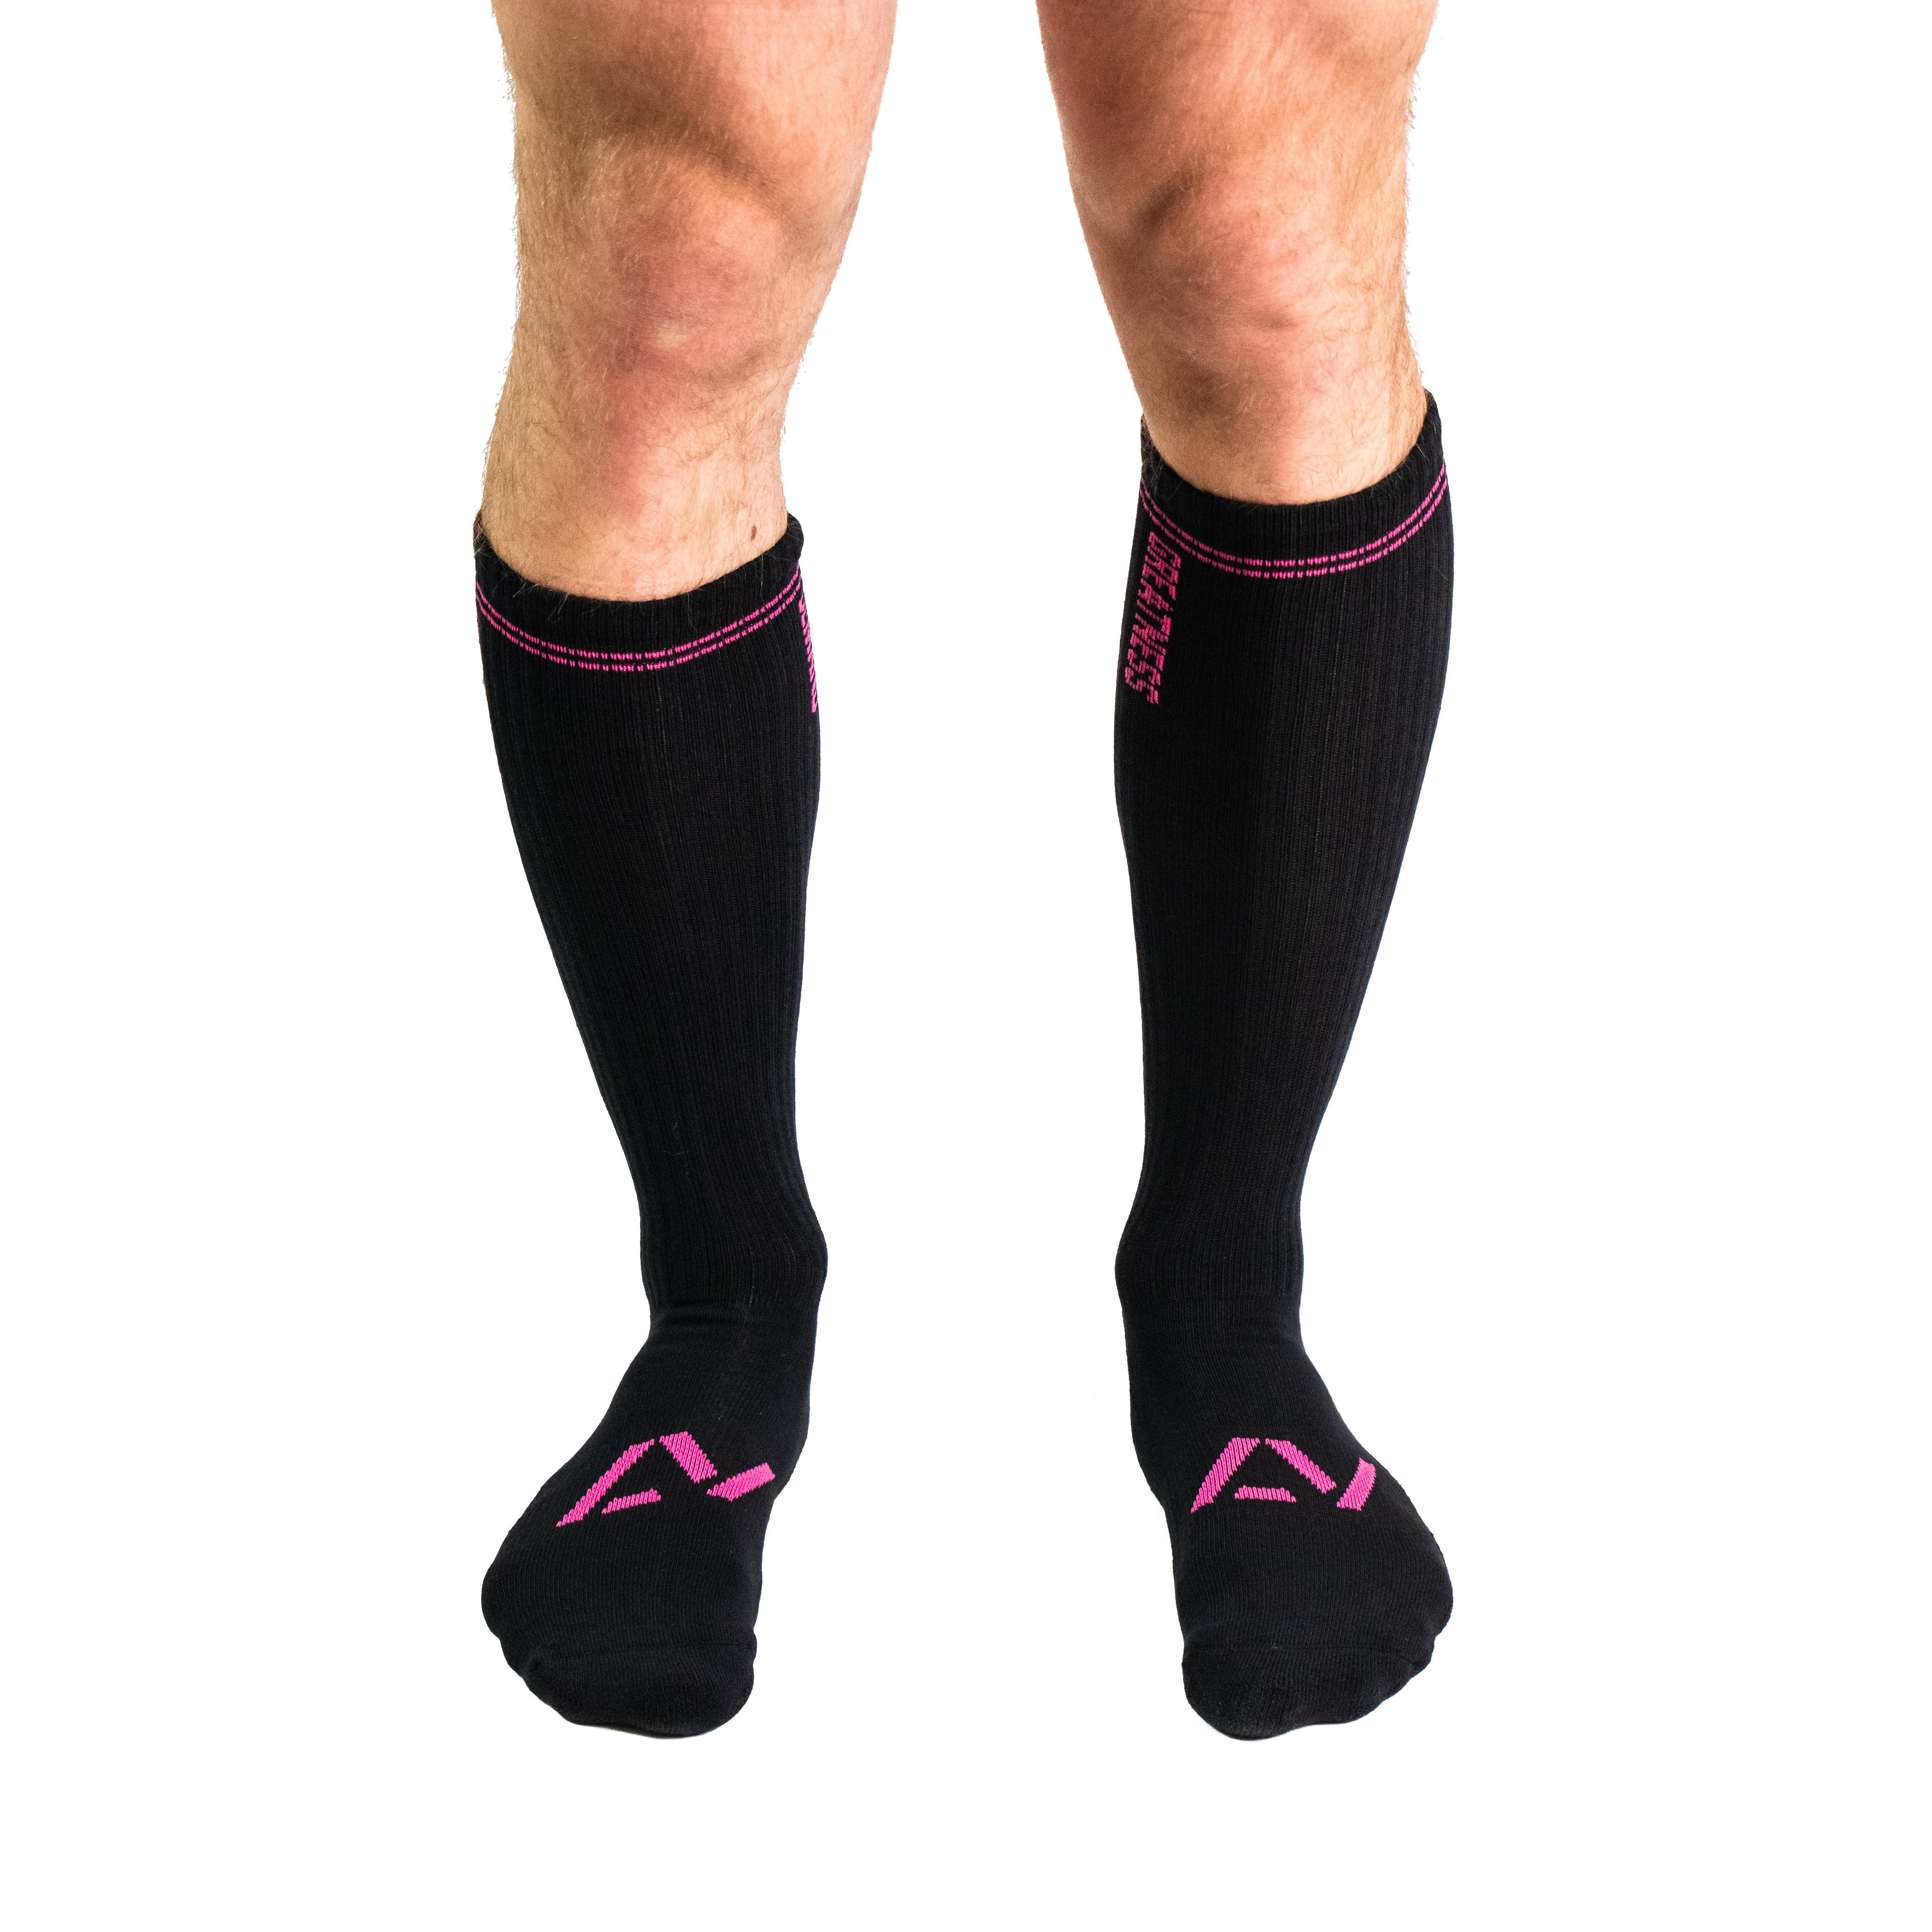 Standout from the crowd in our Pink Deadlift socks and let your energy show on the platform, in your training or while out and about.